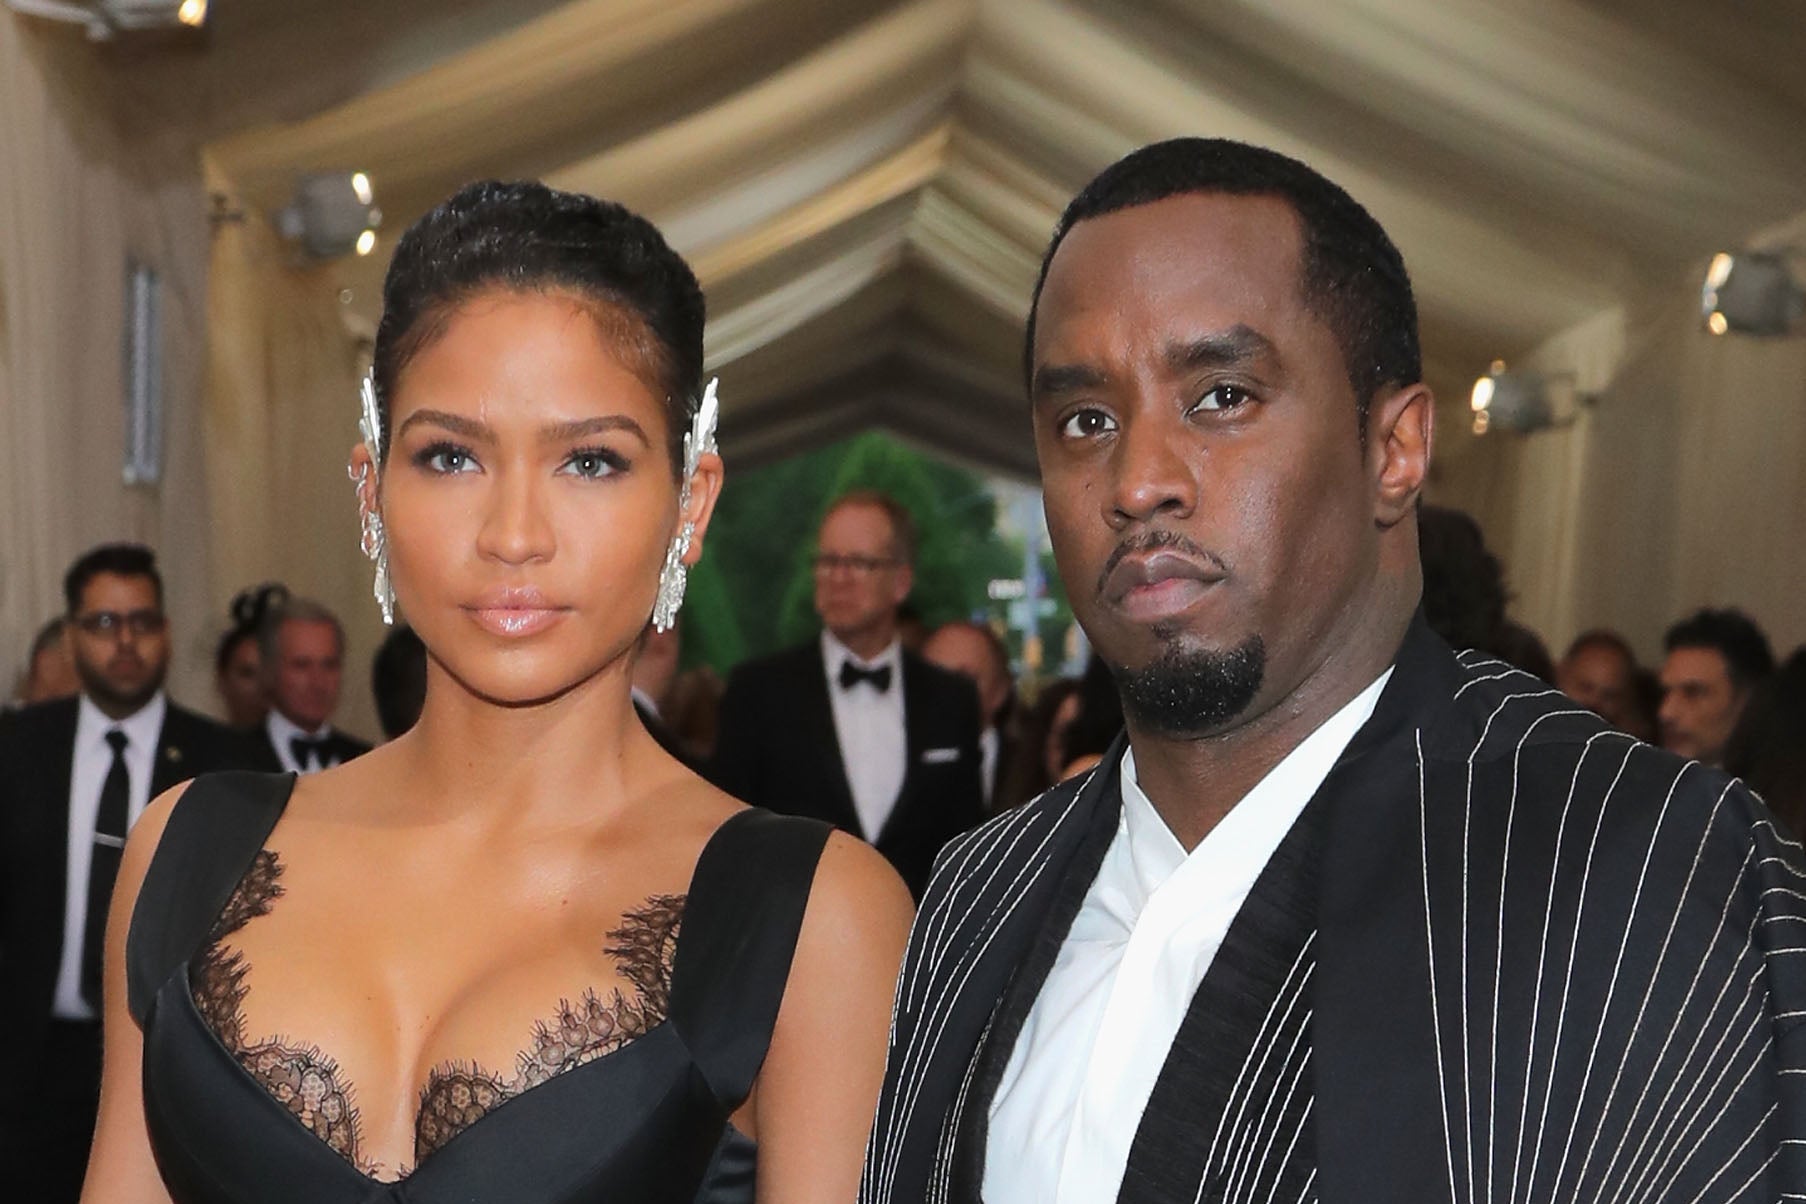 diddy, husband of singer cassie condemns sean ‘diddy’ combs after assault video